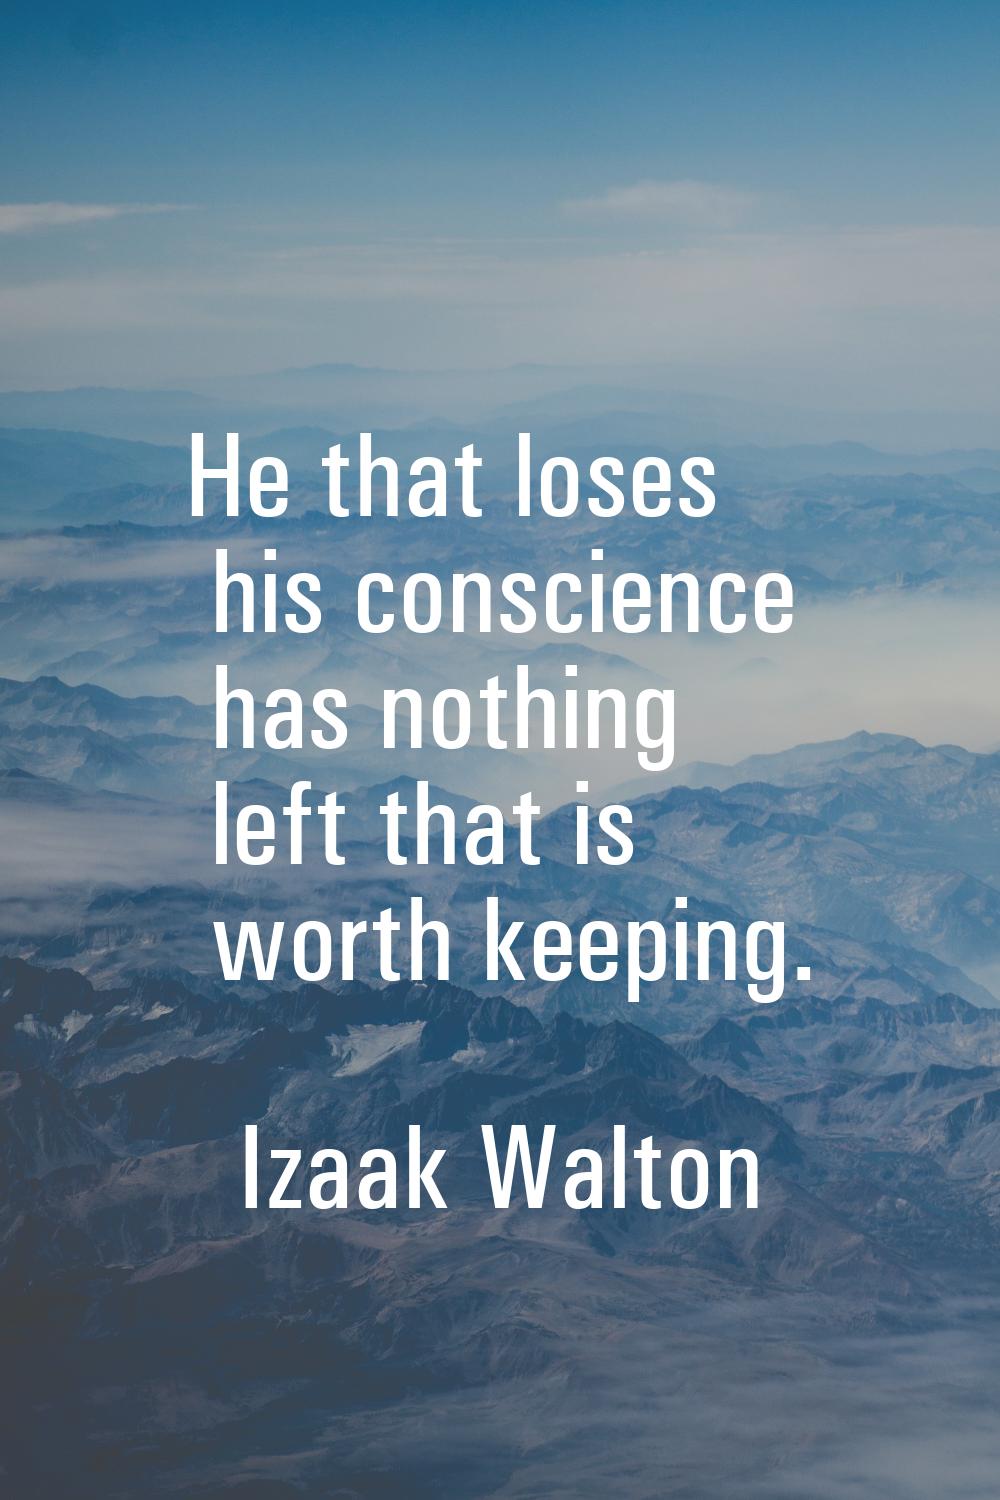 He that loses his conscience has nothing left that is worth keeping.